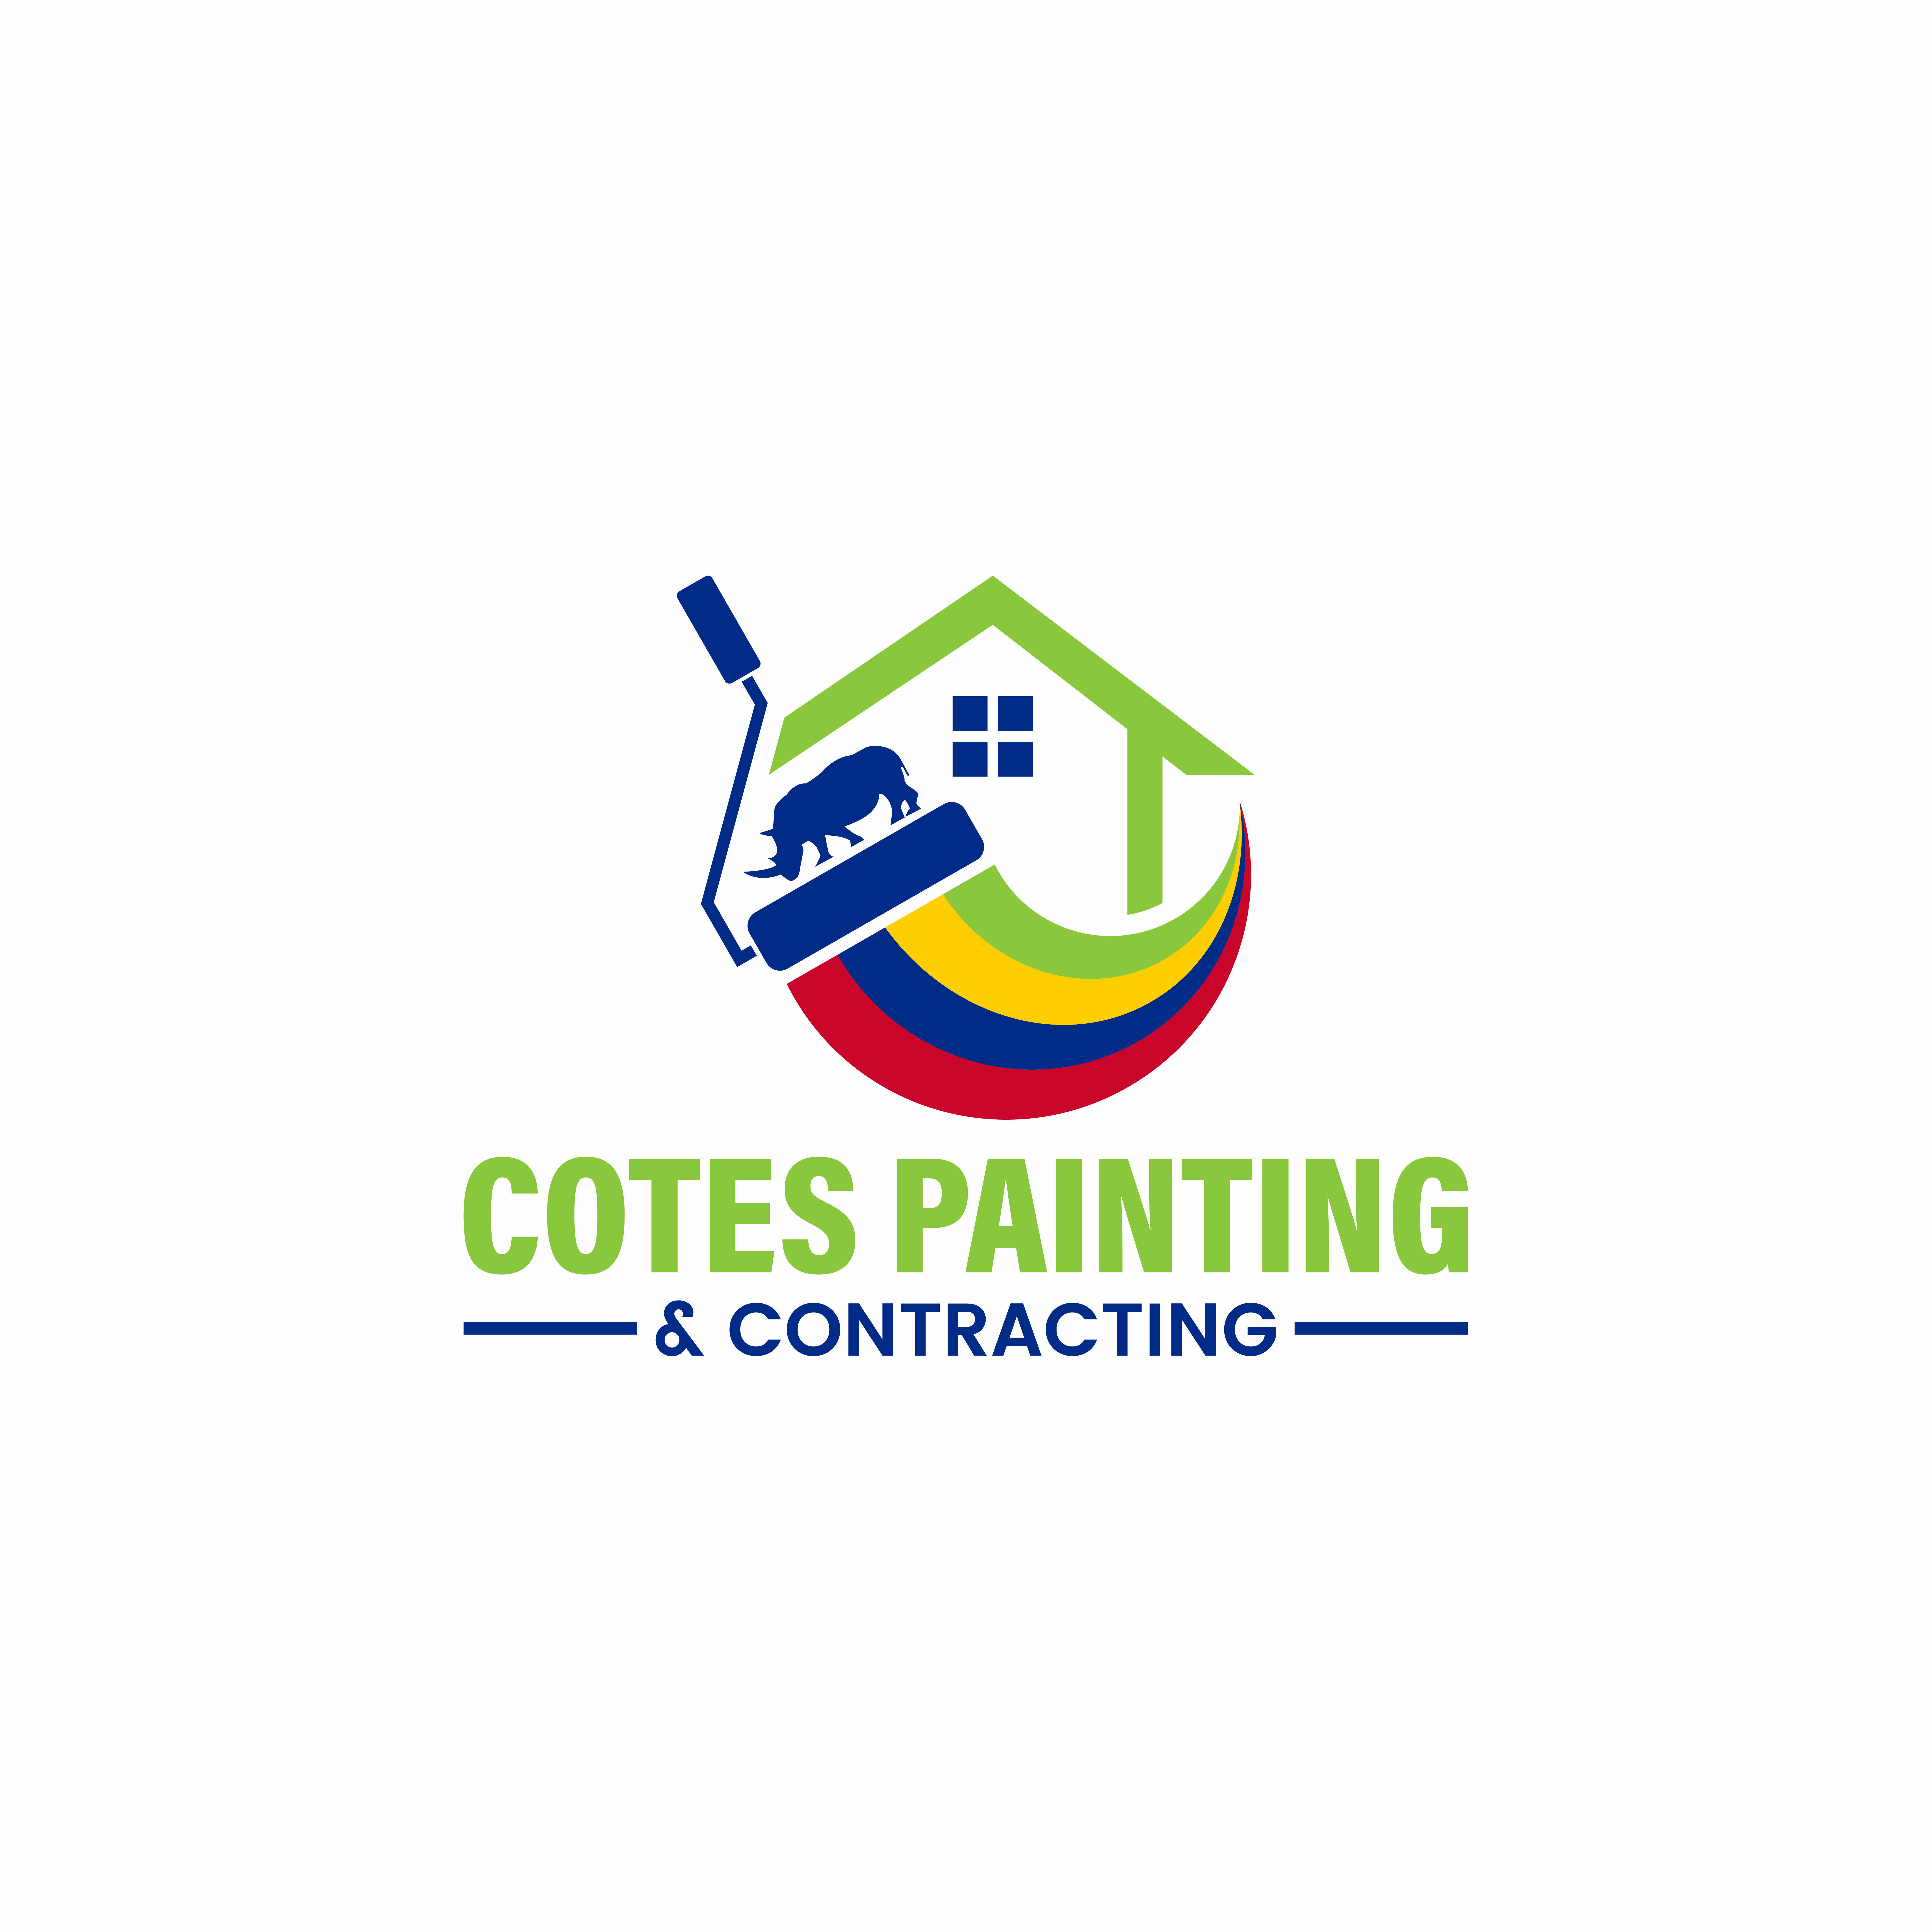 Cotes Painting & Contracting's logo